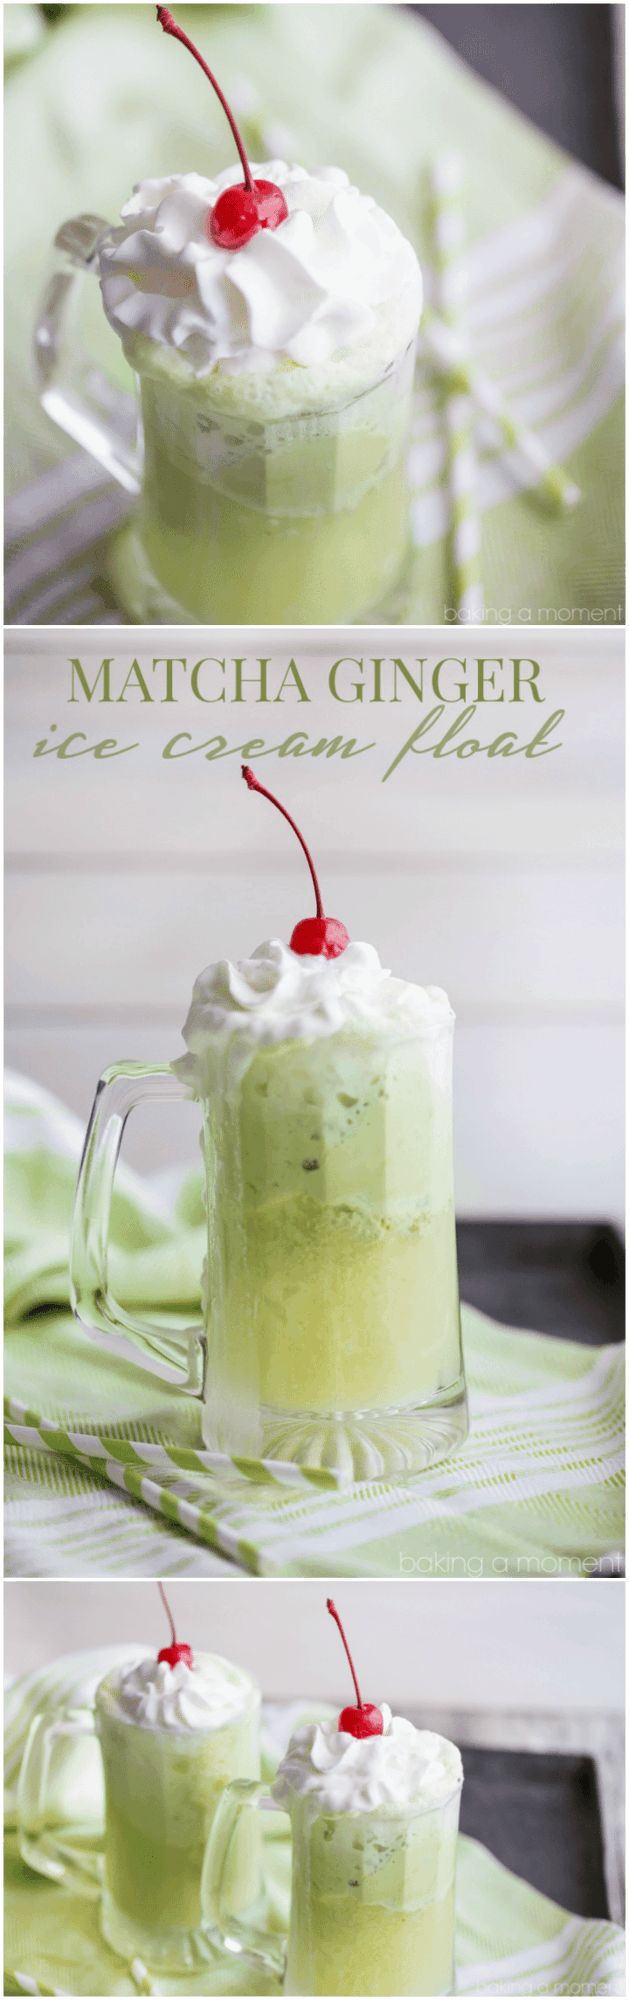 Loved the flavor combination in this Matcha Ginger Ice Cream Float! Definitely will be making this for St. Patrick's Day ;)